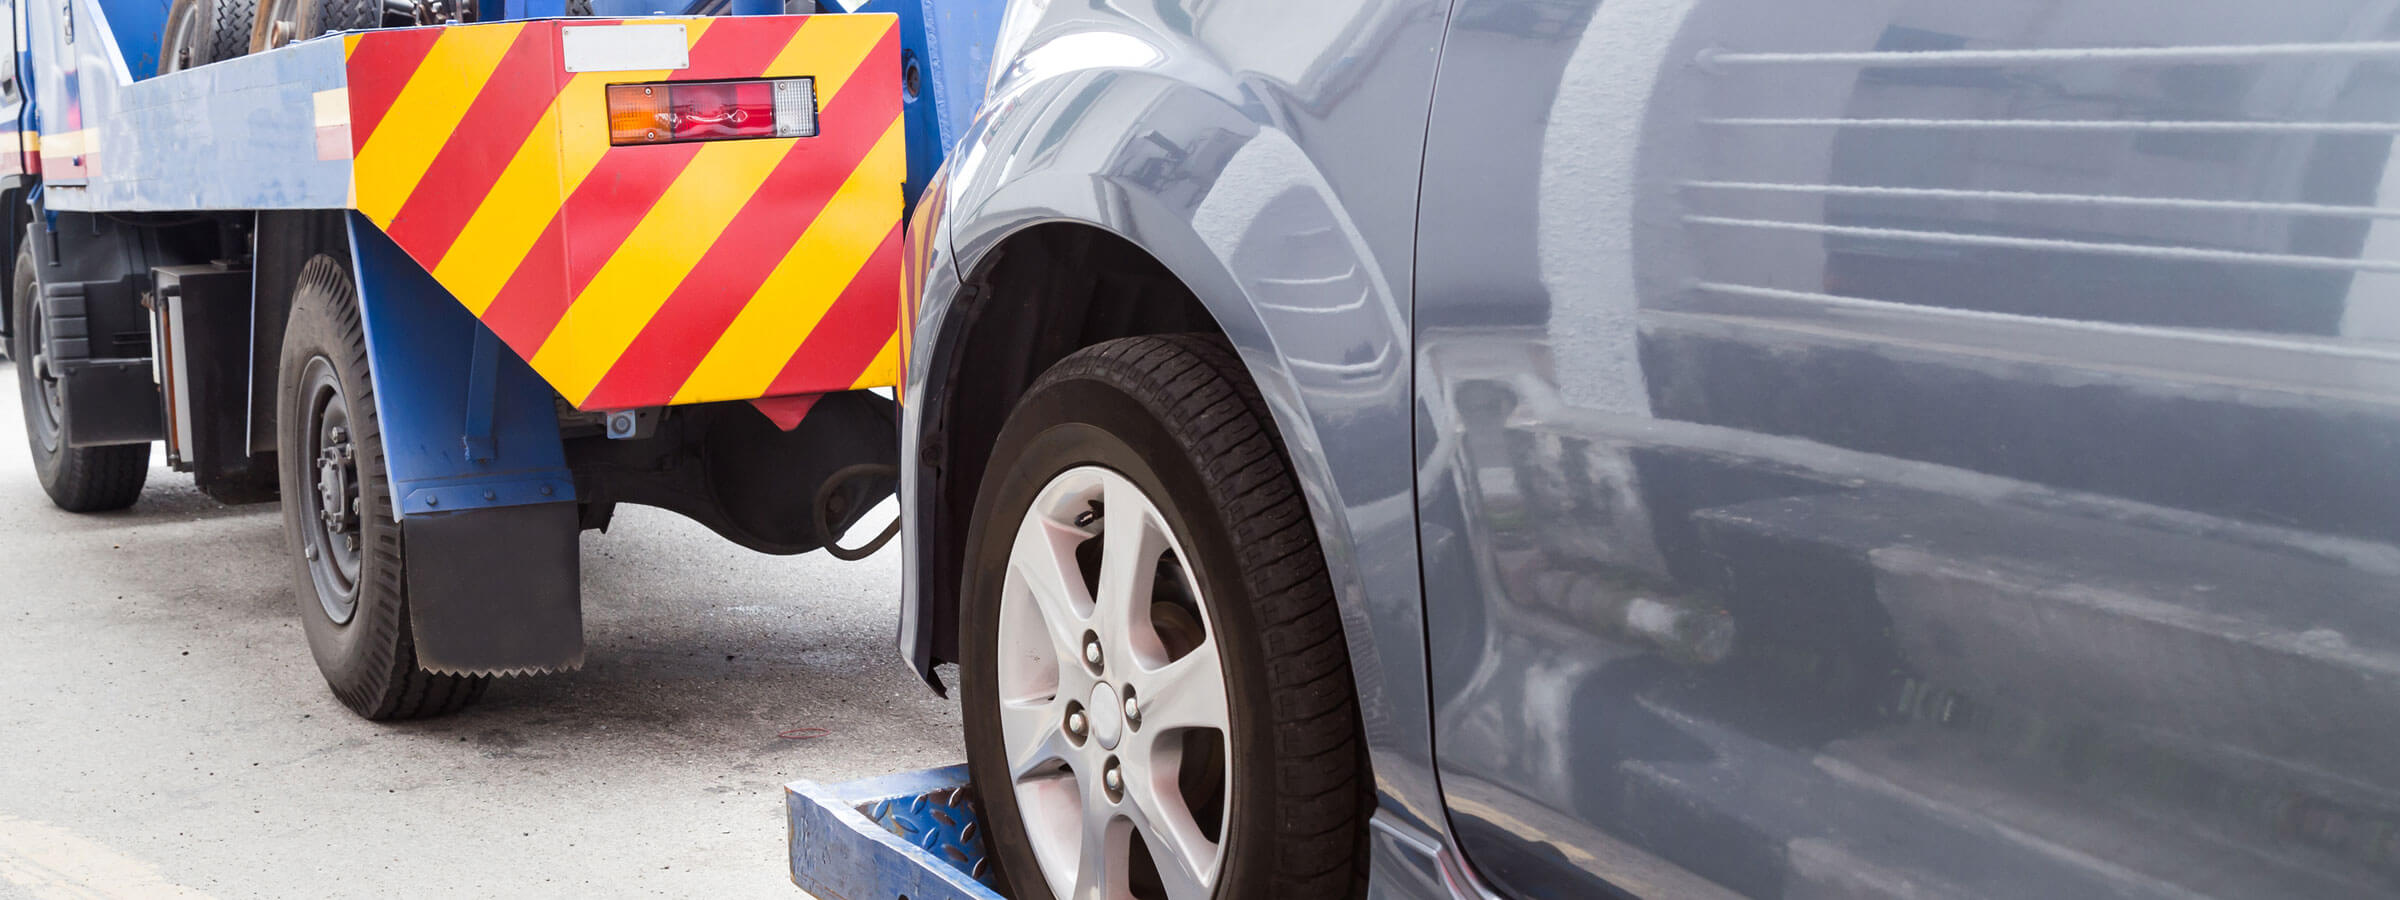 Towing Services in Surrey